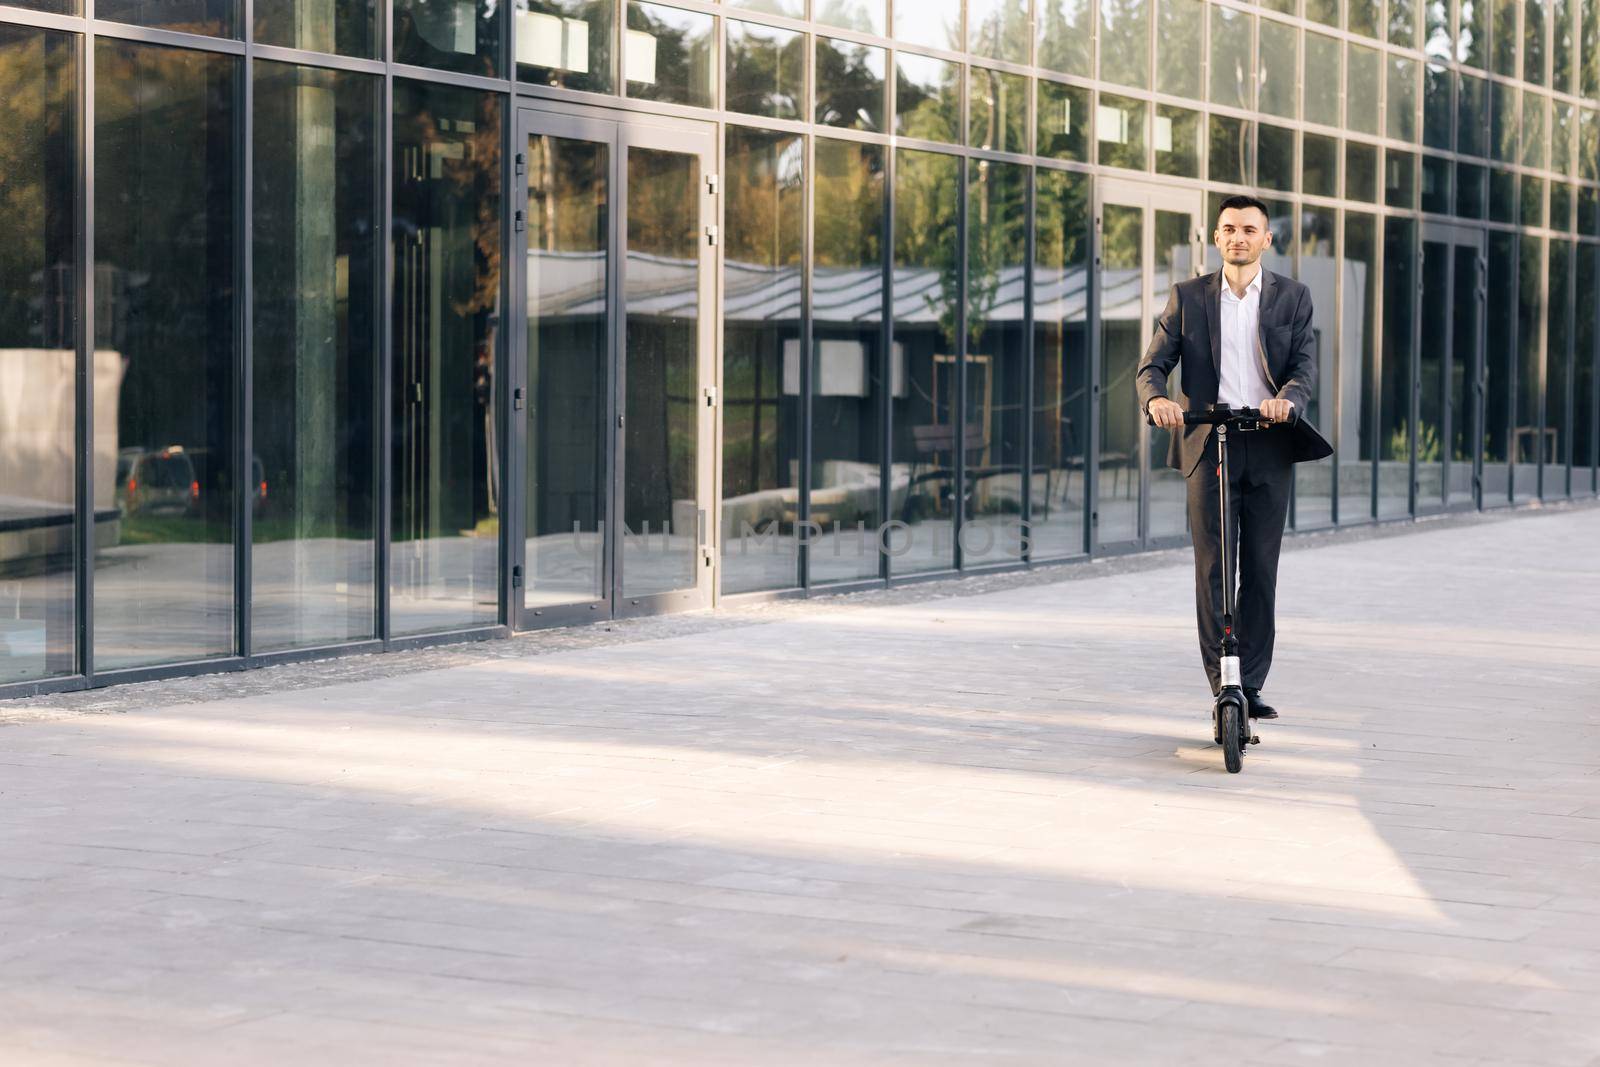 Man rides an electric scooter on the road. Modern way of getting around. Handsome man in a suit riding electric scooter in a city. Adult businessman riding with electric scooter to work by uflypro